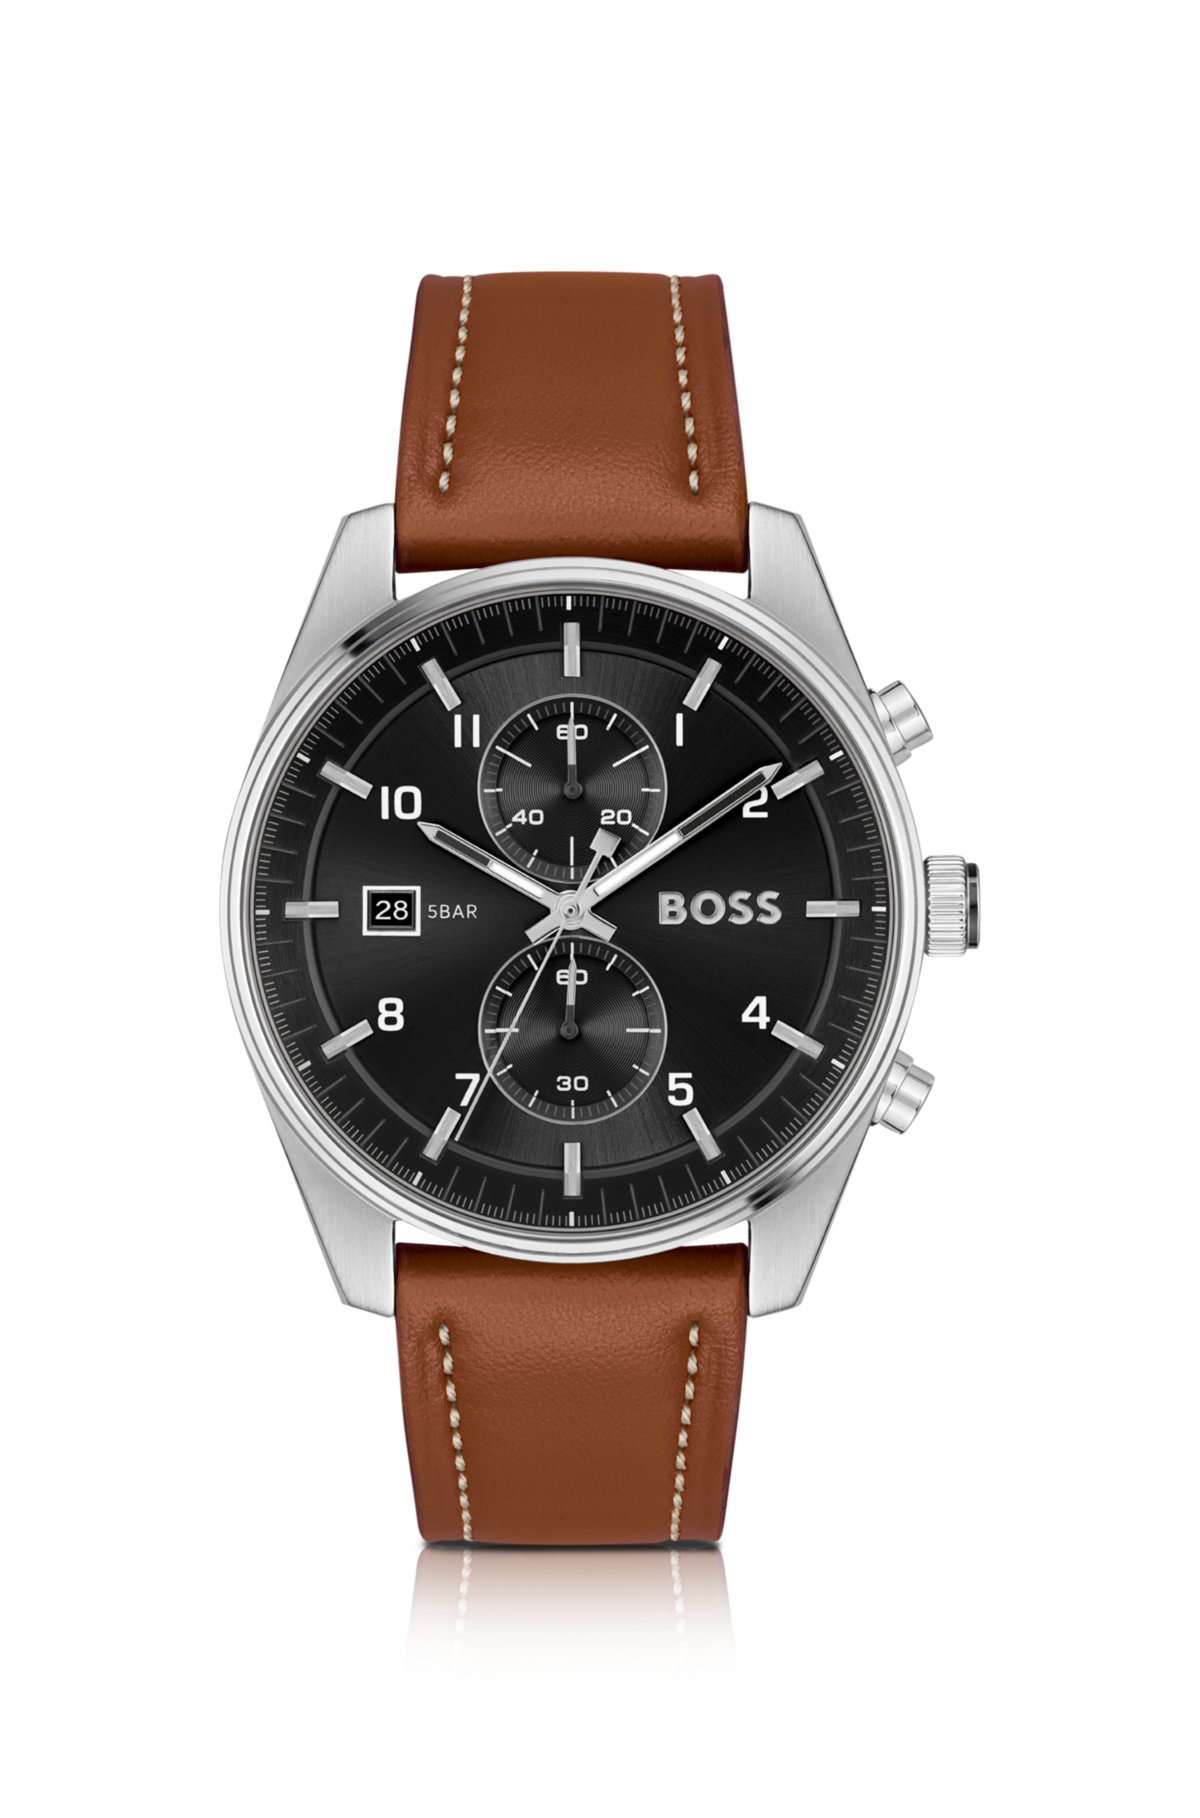 Black-dial chronograph watch with brown leather strap, Brown